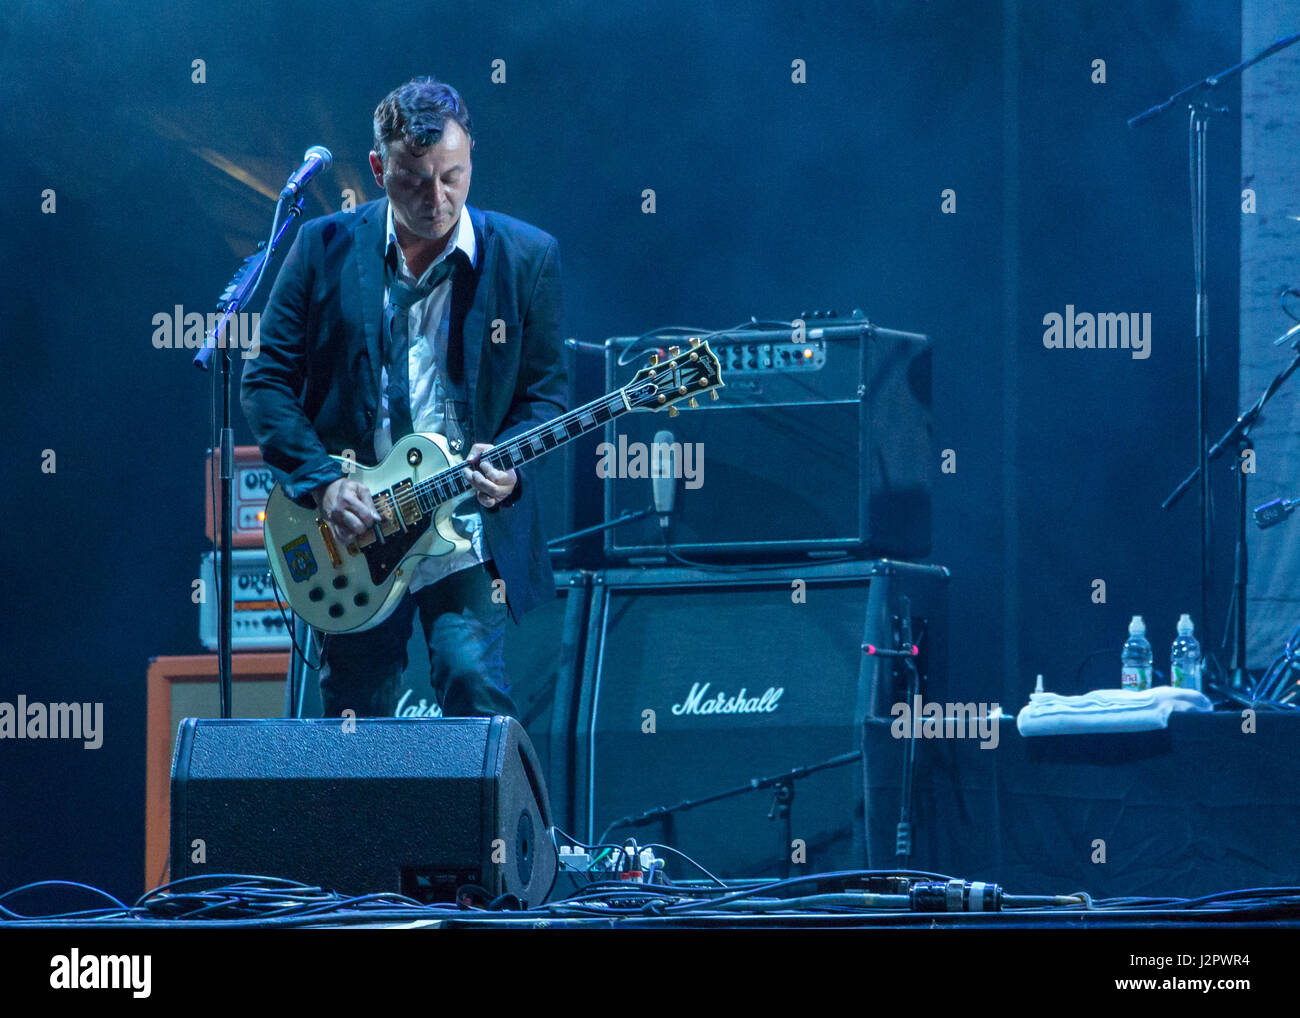 James Dean Bradfield of the Manic Street Preachers at the Sziget Festival in Budapest, Hungary Stock Photo